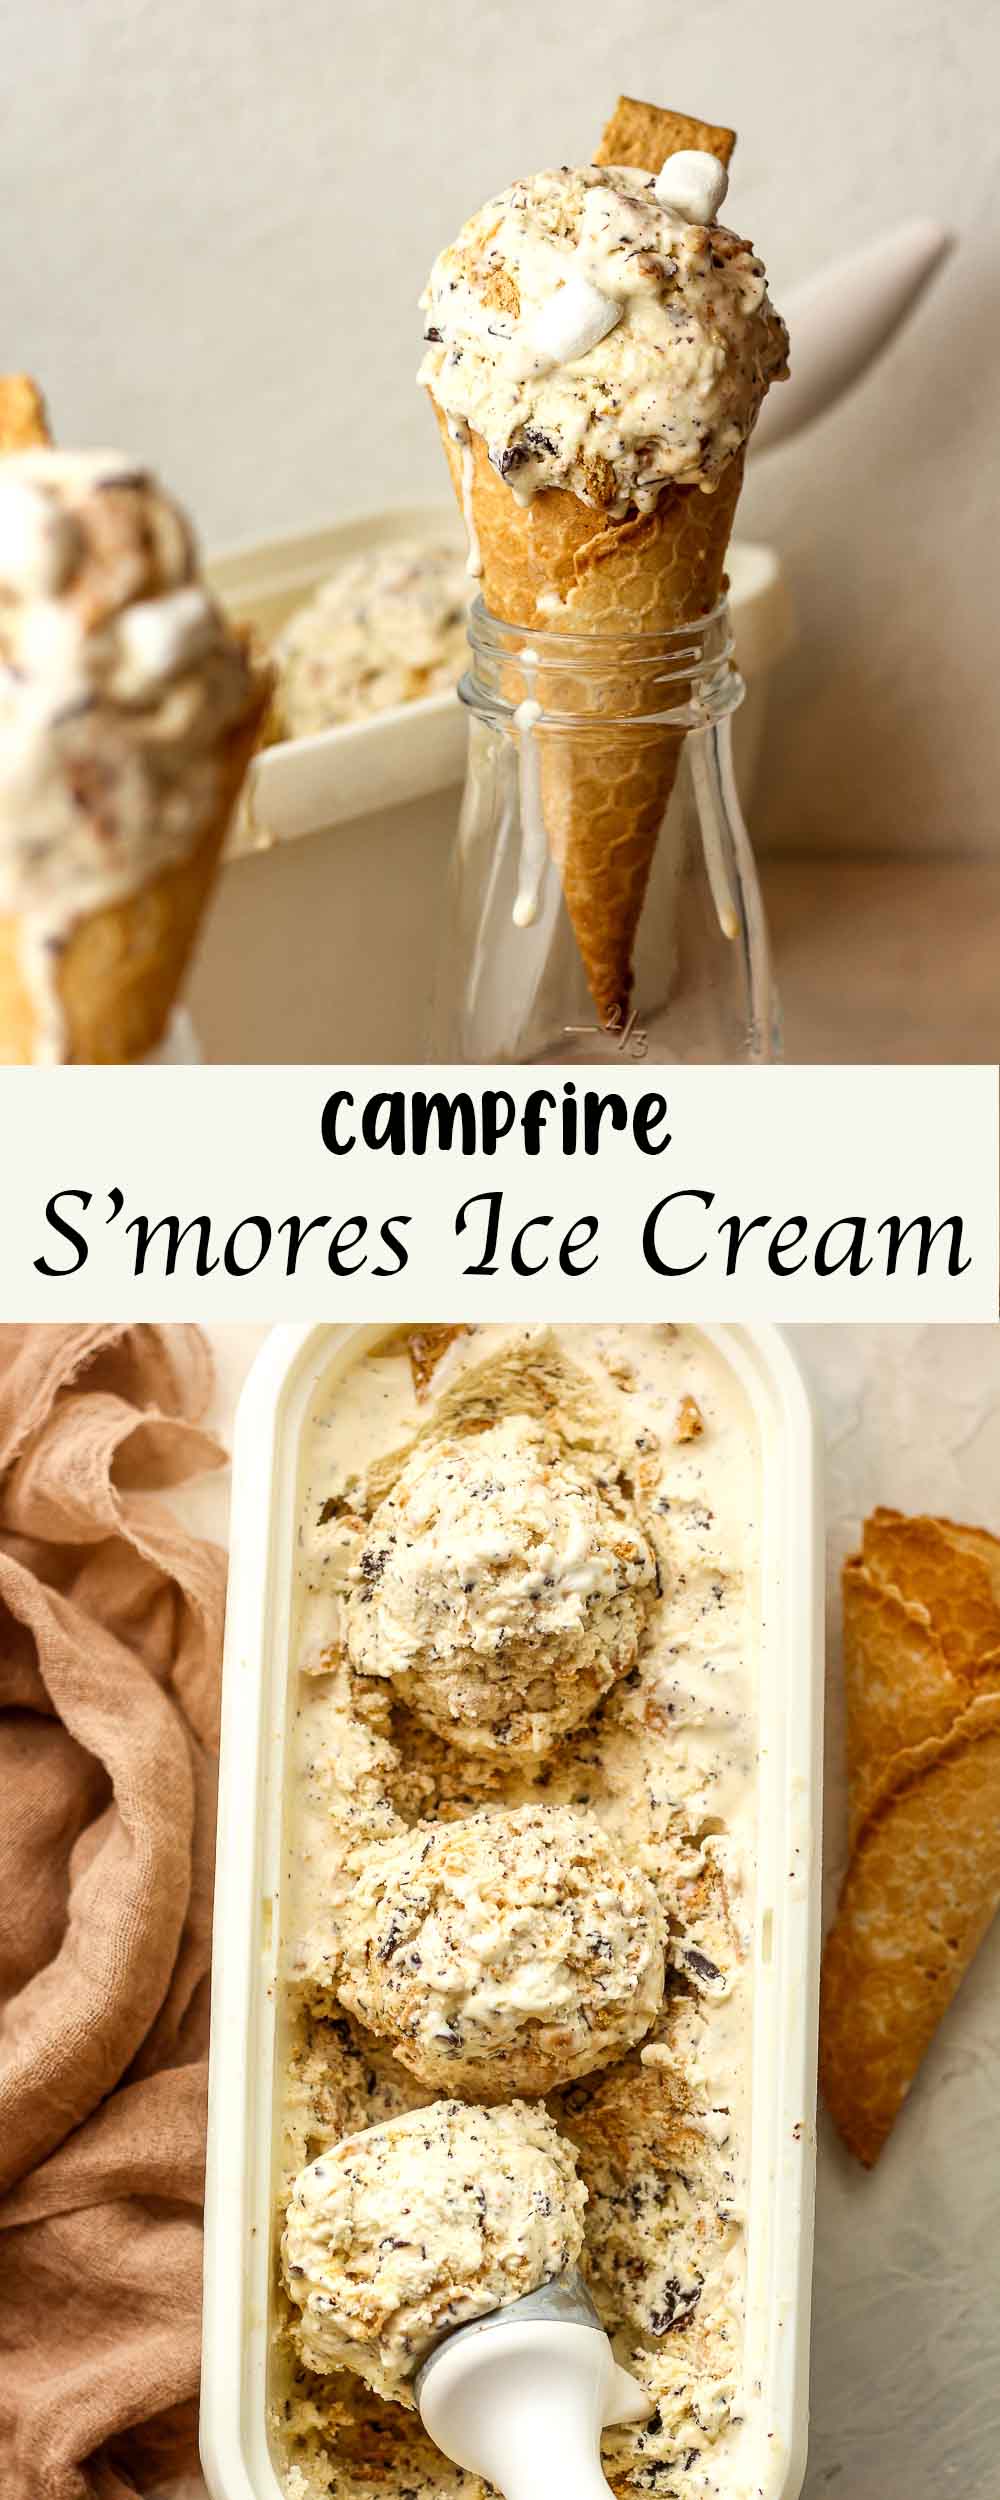 A collage of pictures of campfire s'mores ice cream.